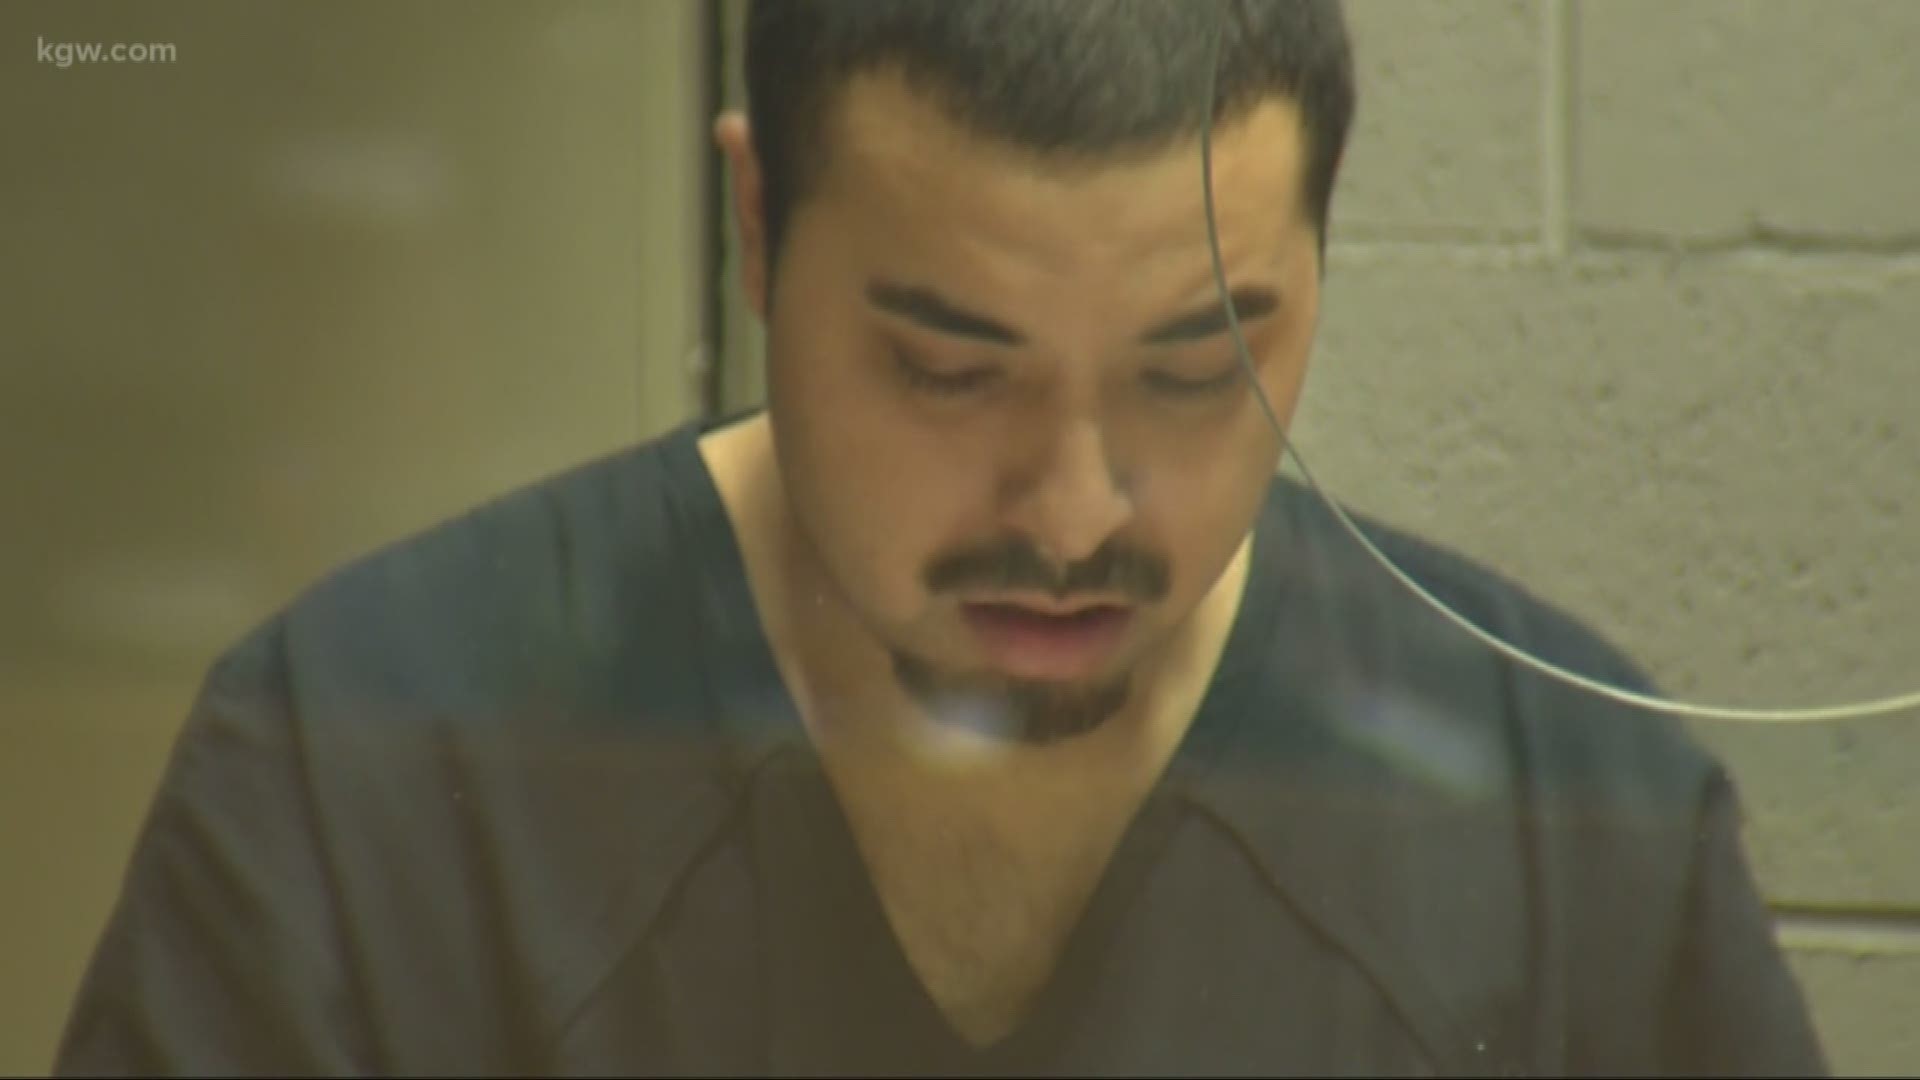 The suspected driver in a crash that killed 3 teens is being held without bail.